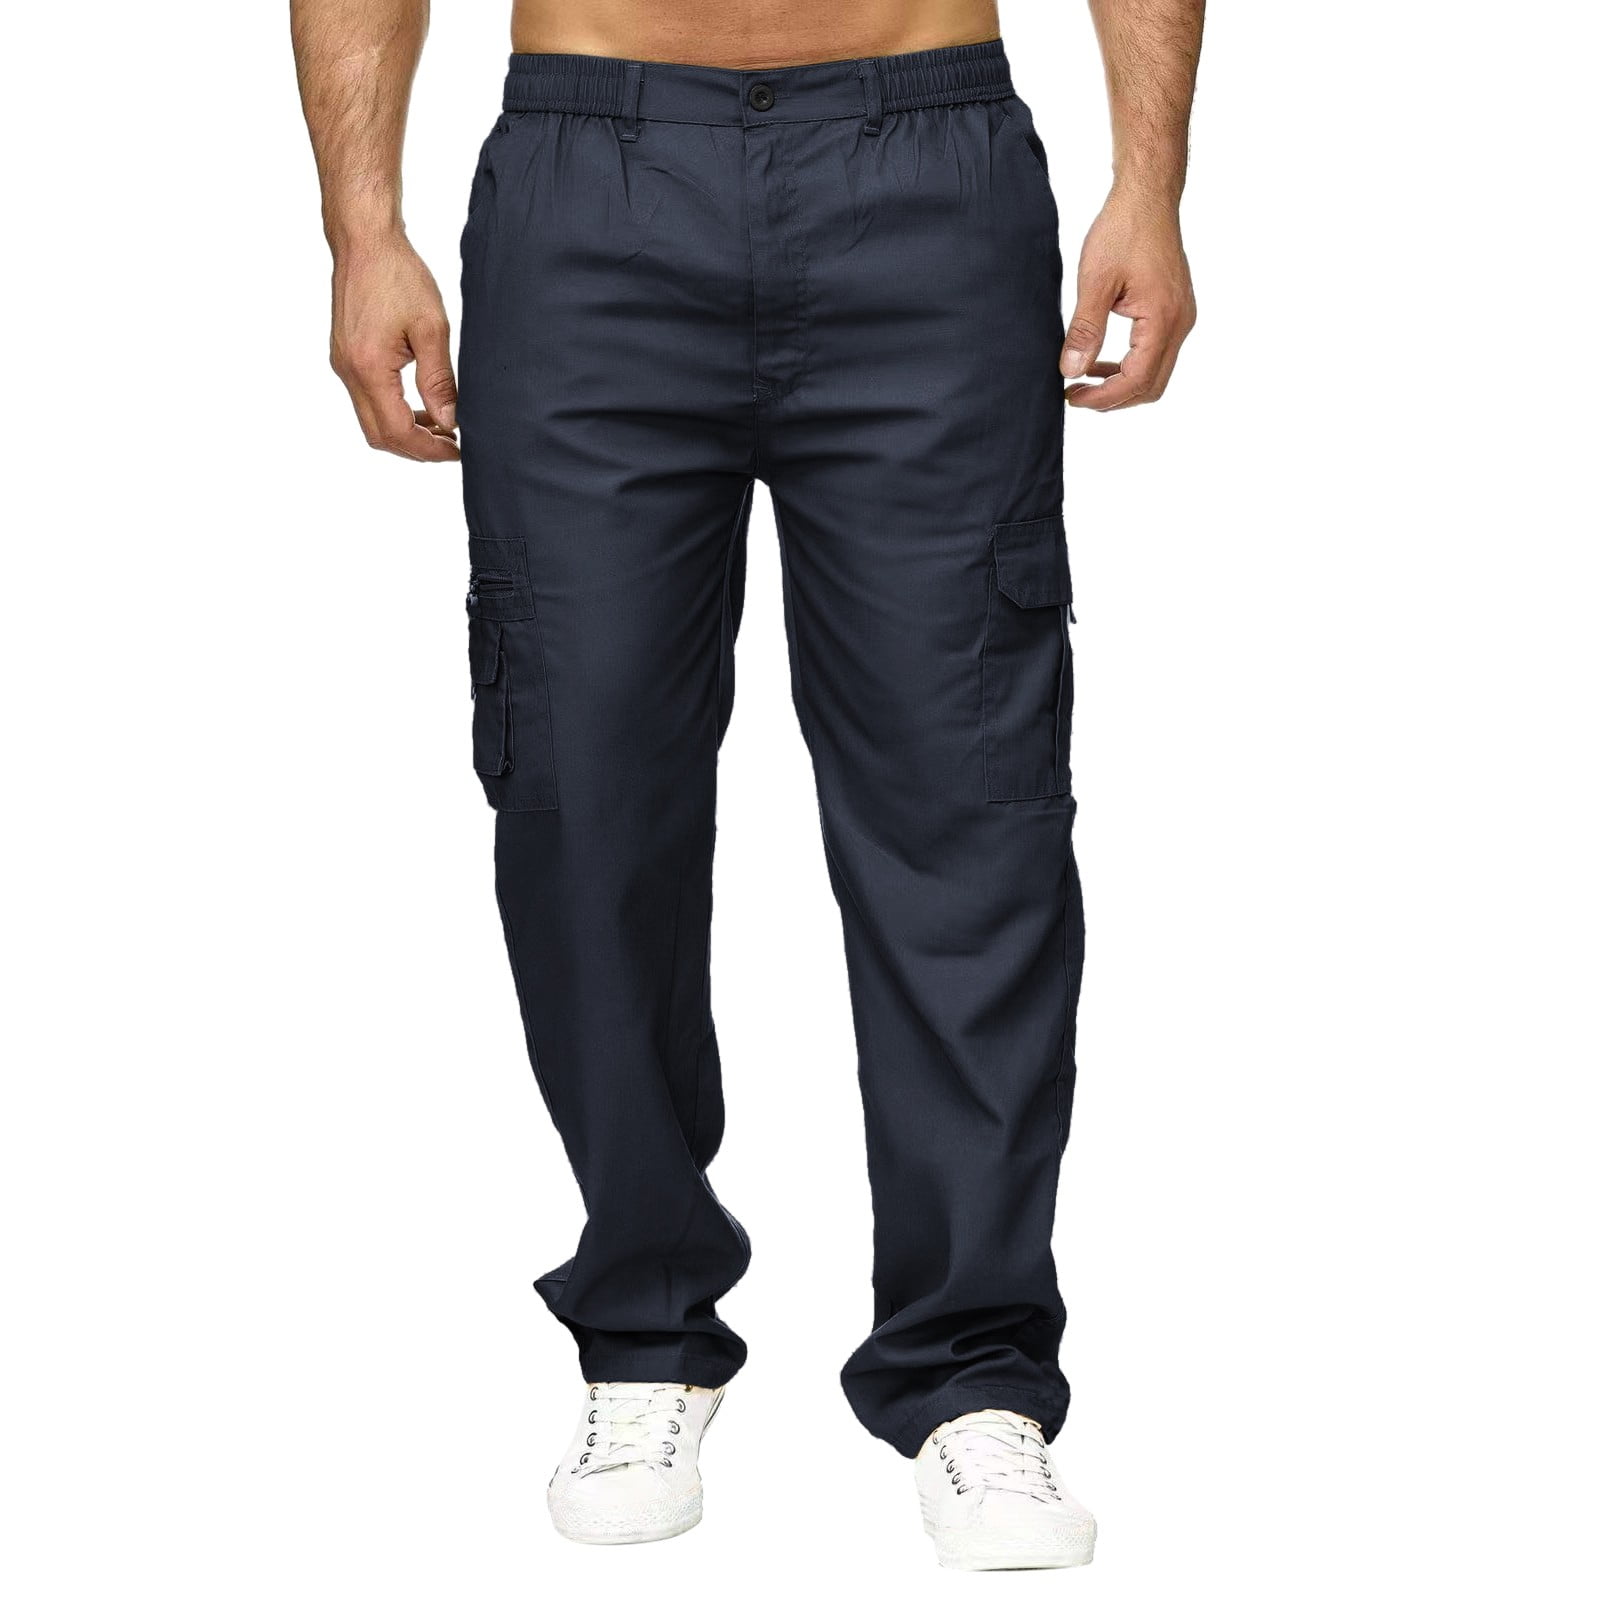 Men's Pockets Military Cargo Pant Elastic Waisted Relaxed, 40% OFF